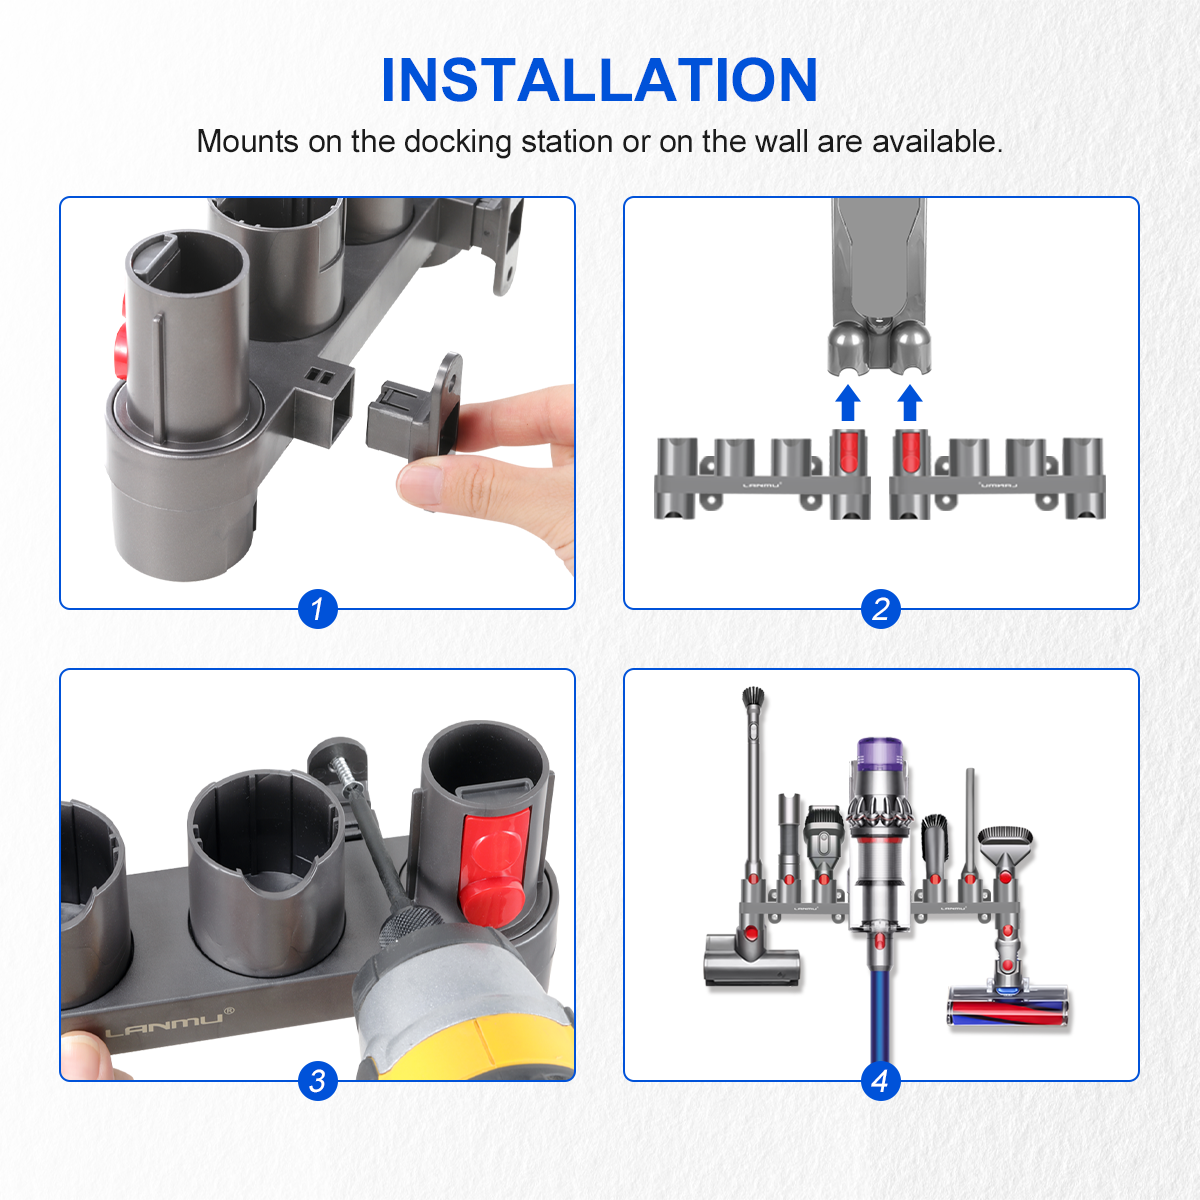 installation: mounts on the docking station or on the wall are available.